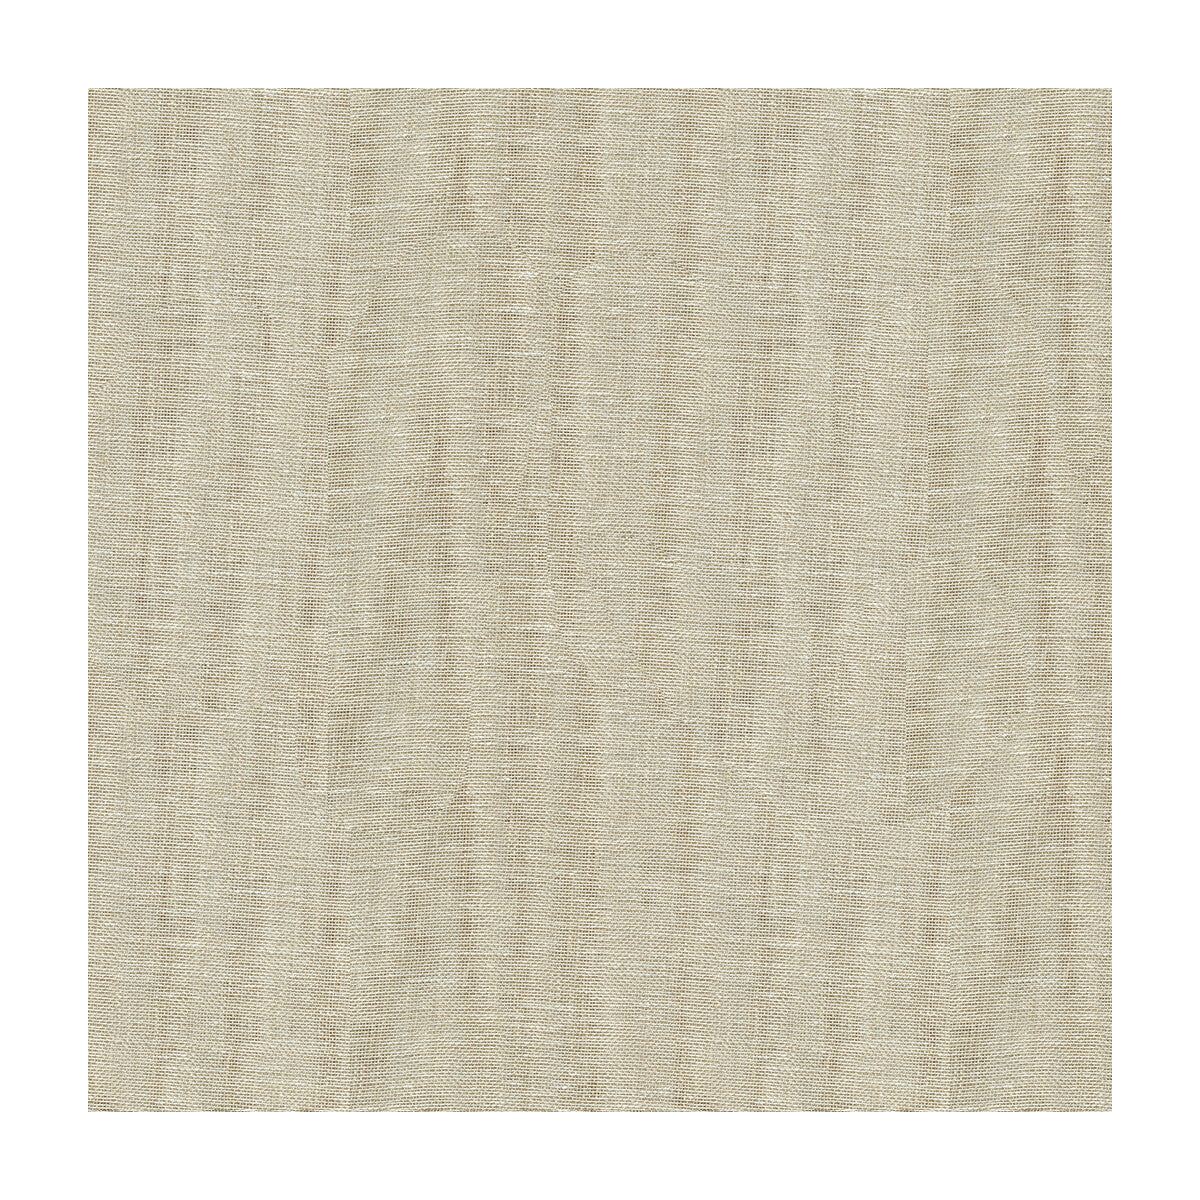 Kravet Contract fabric in 4155-1116 color - pattern 4155.1116.0 - by Kravet Contract